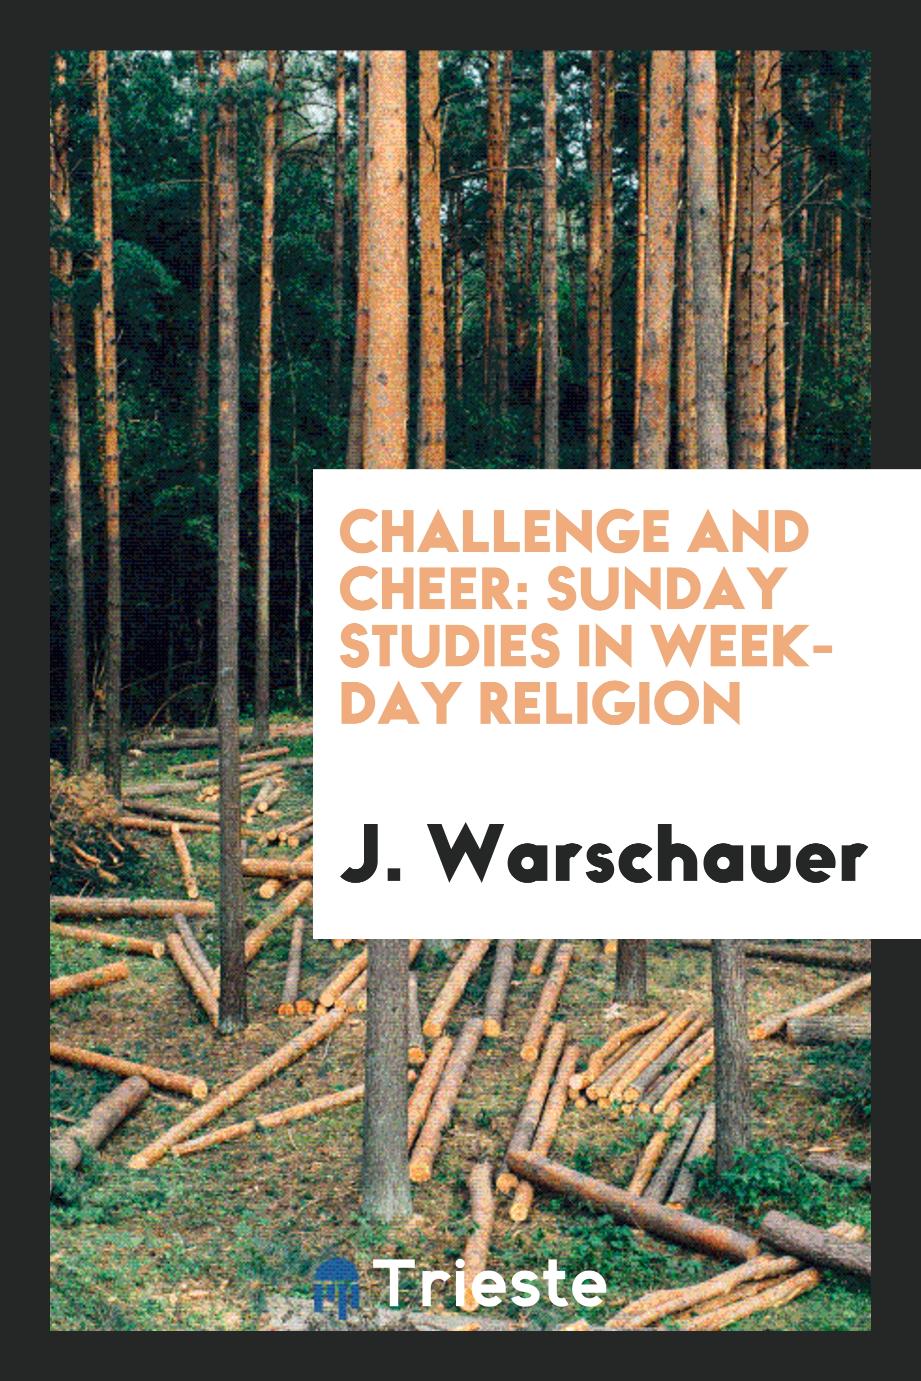 Challenge and cheer: Sunday studies in week-day religion